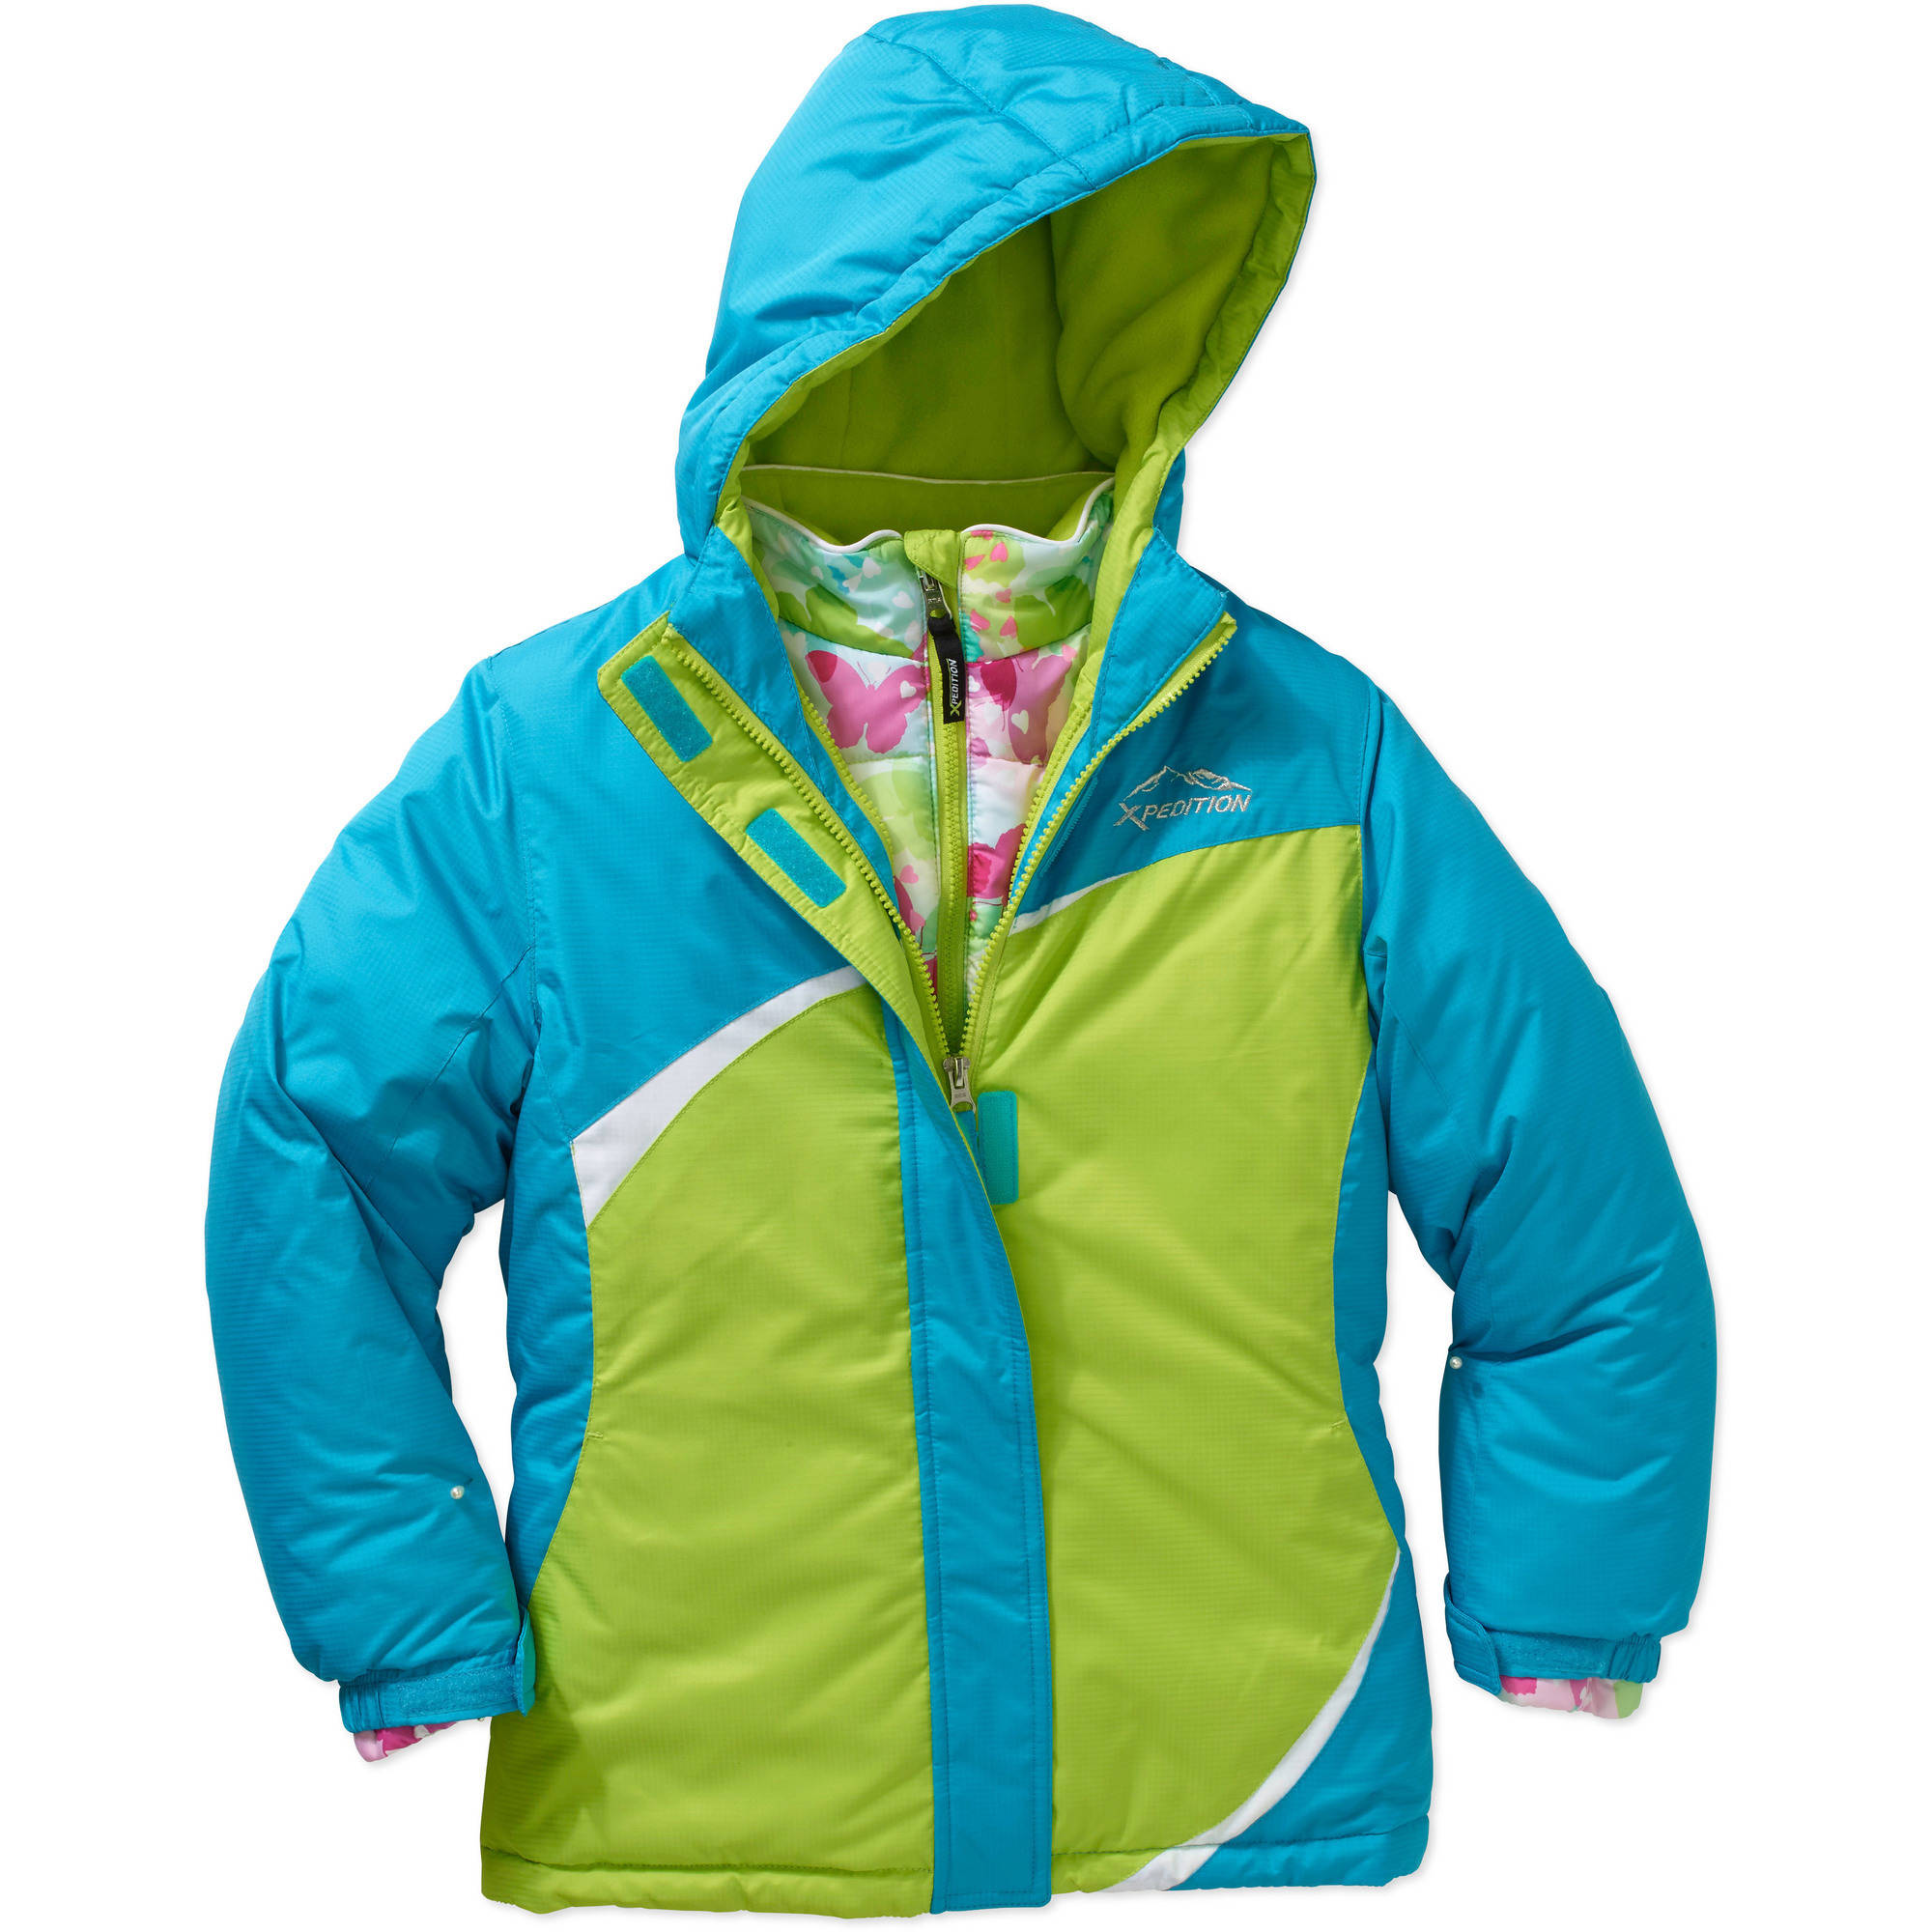 Girls' 3 in 1 Systems Jacket - image 1 of 2